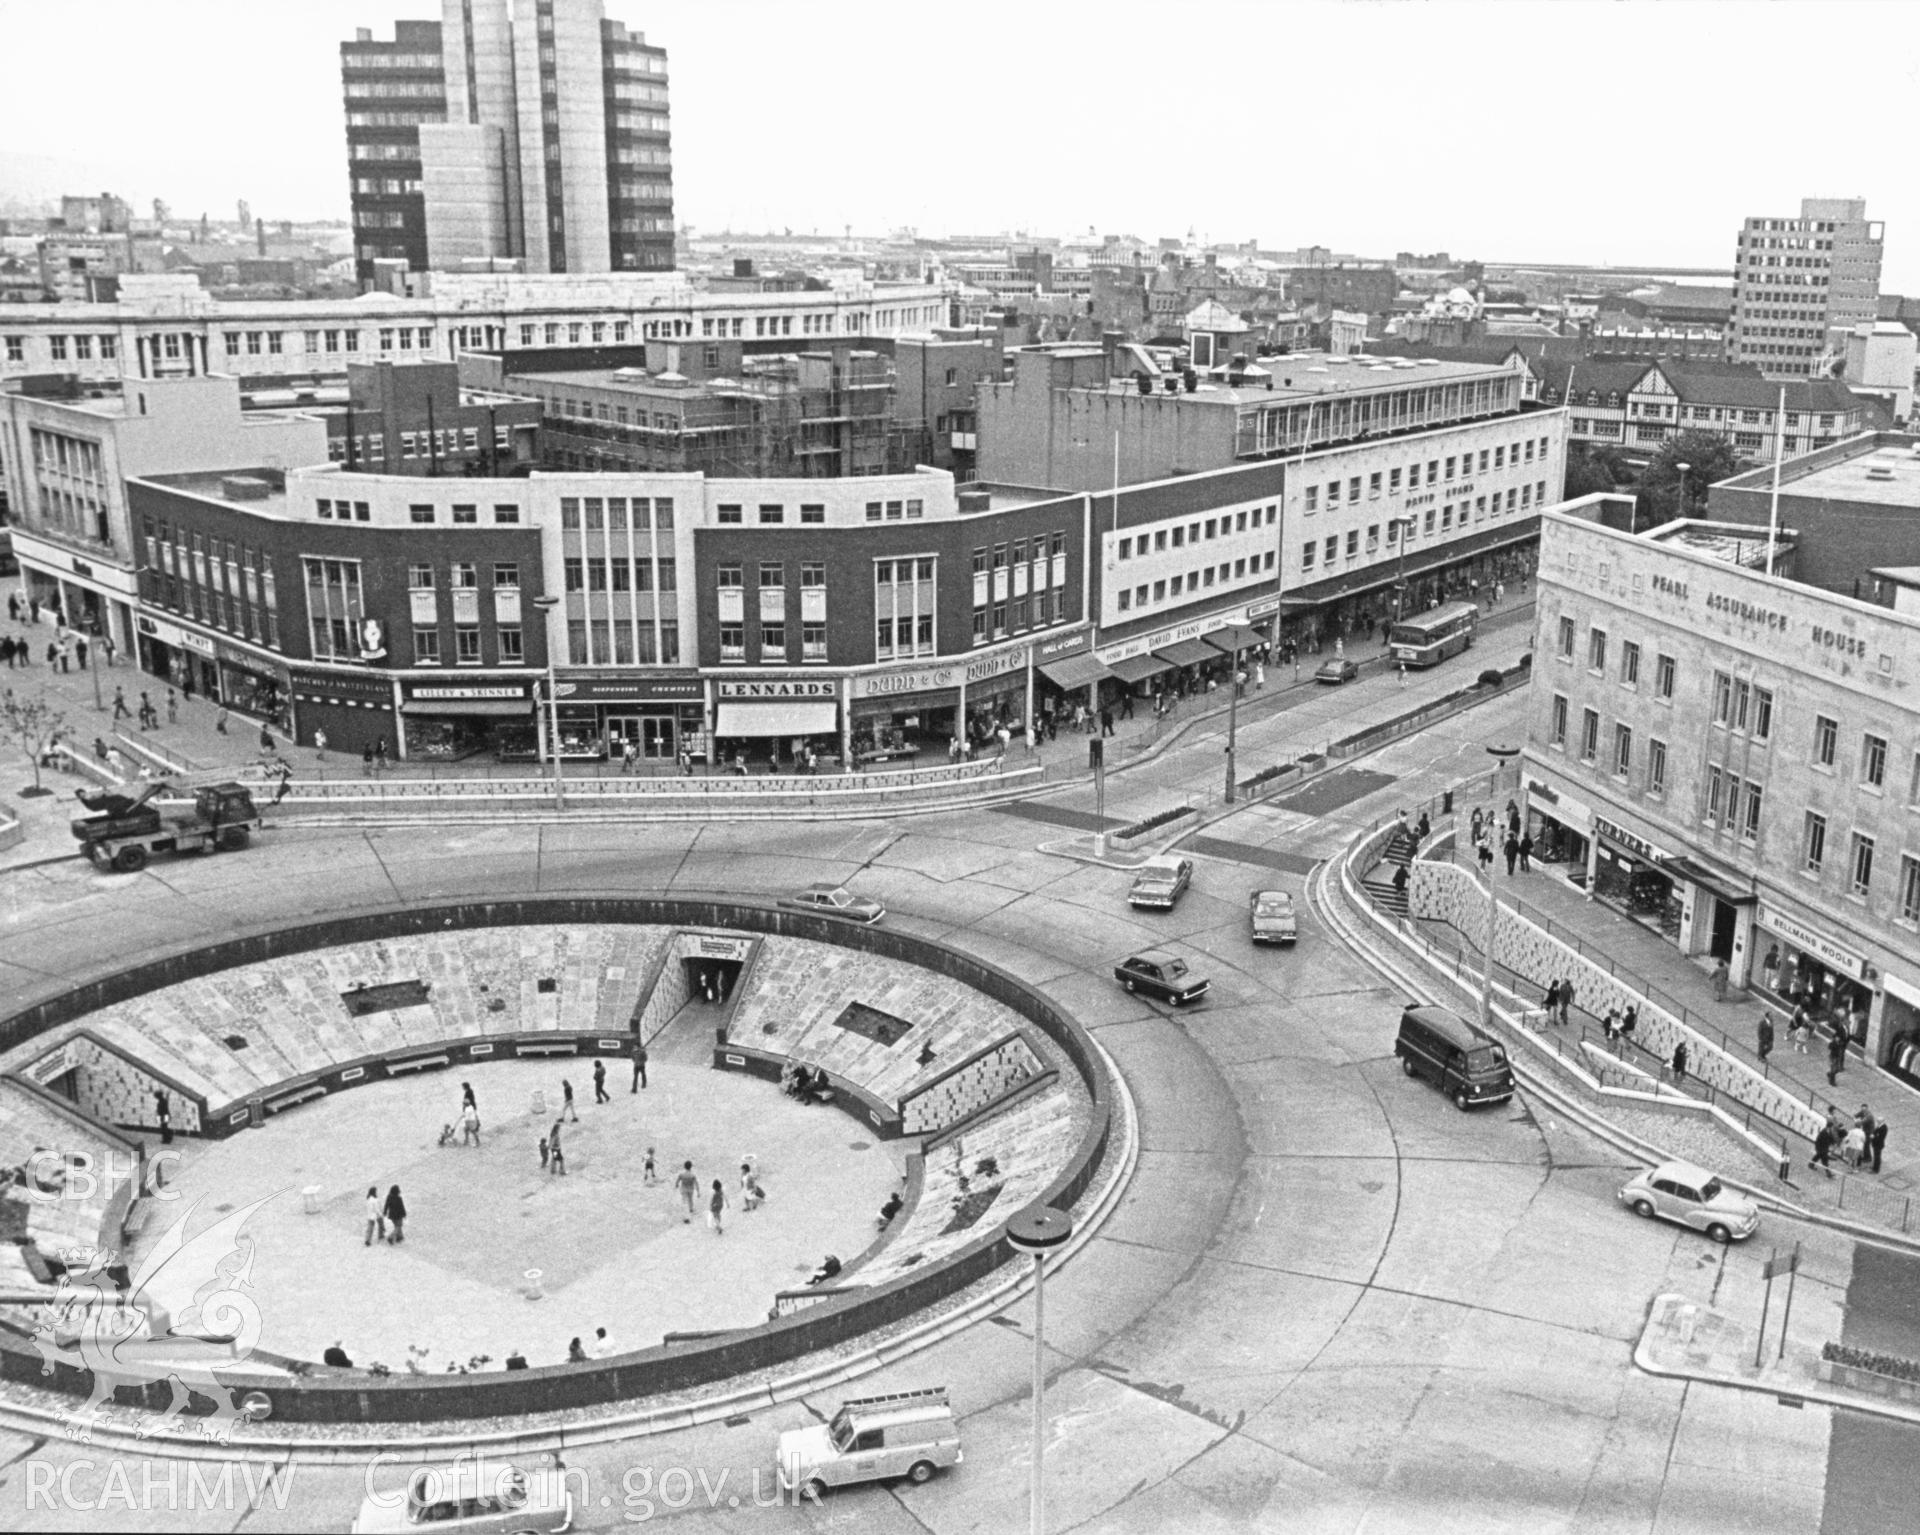 1 b/w print showing view of Swansea (including the large roundabout at the eastern end of the Kingsway which incorporated a pedestrian subway, the subway has now been filled in); collated by the former Central Office of Information.